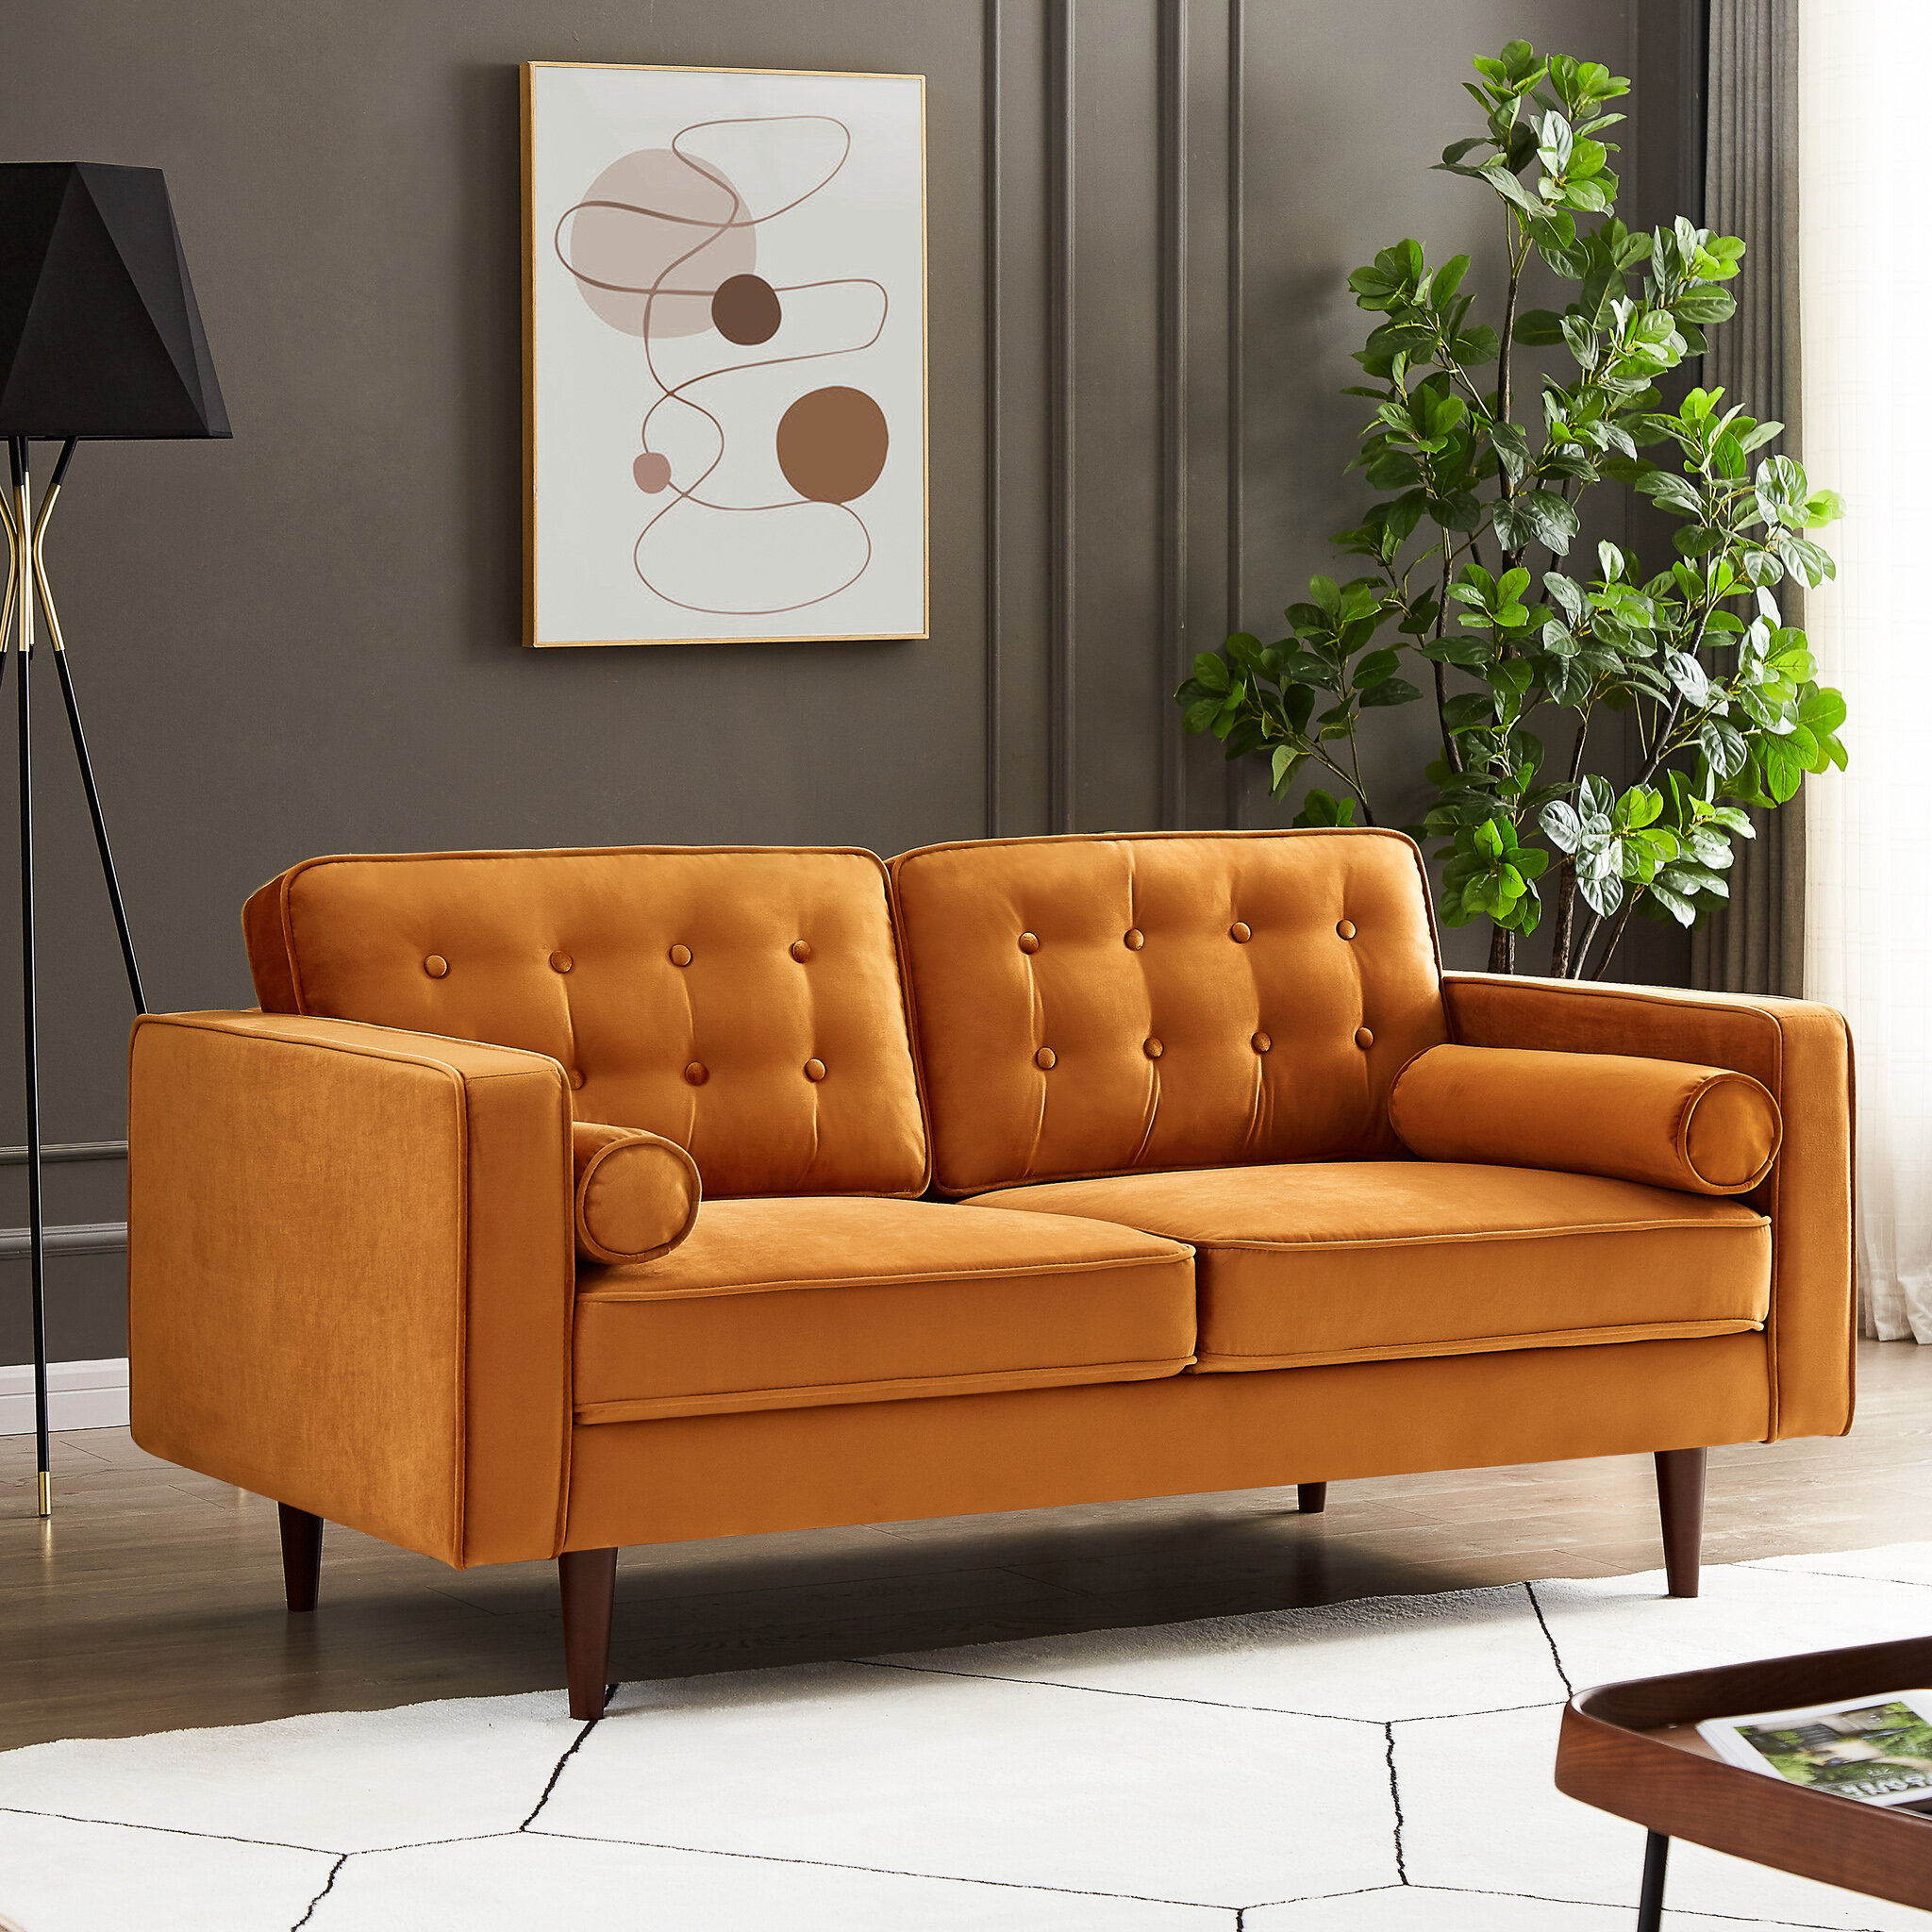 Kingfun 65 W Loveseat Sofa, Mid Century Modern Decor Love Seat Couches for  Living Room, Button Tufted Upholstered Love Seats Furniture, Solid and